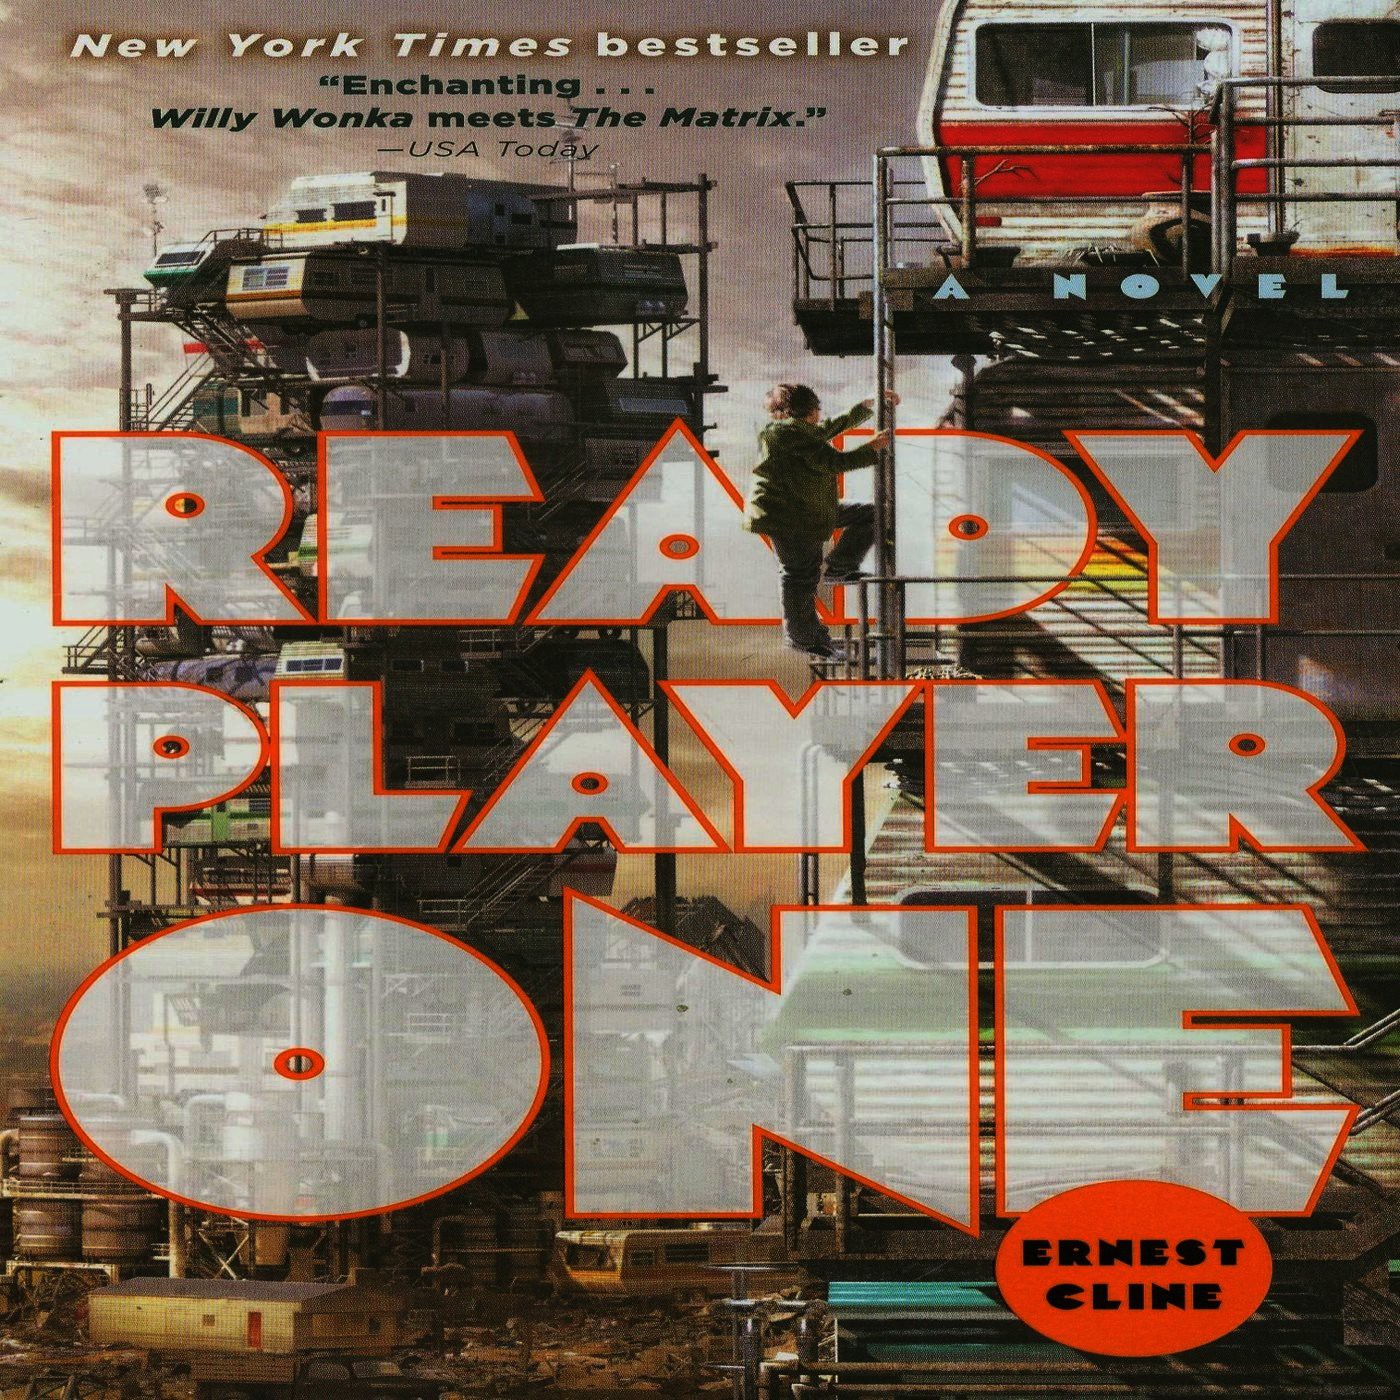 Ready Player One Audiobook Mp3 Torrent